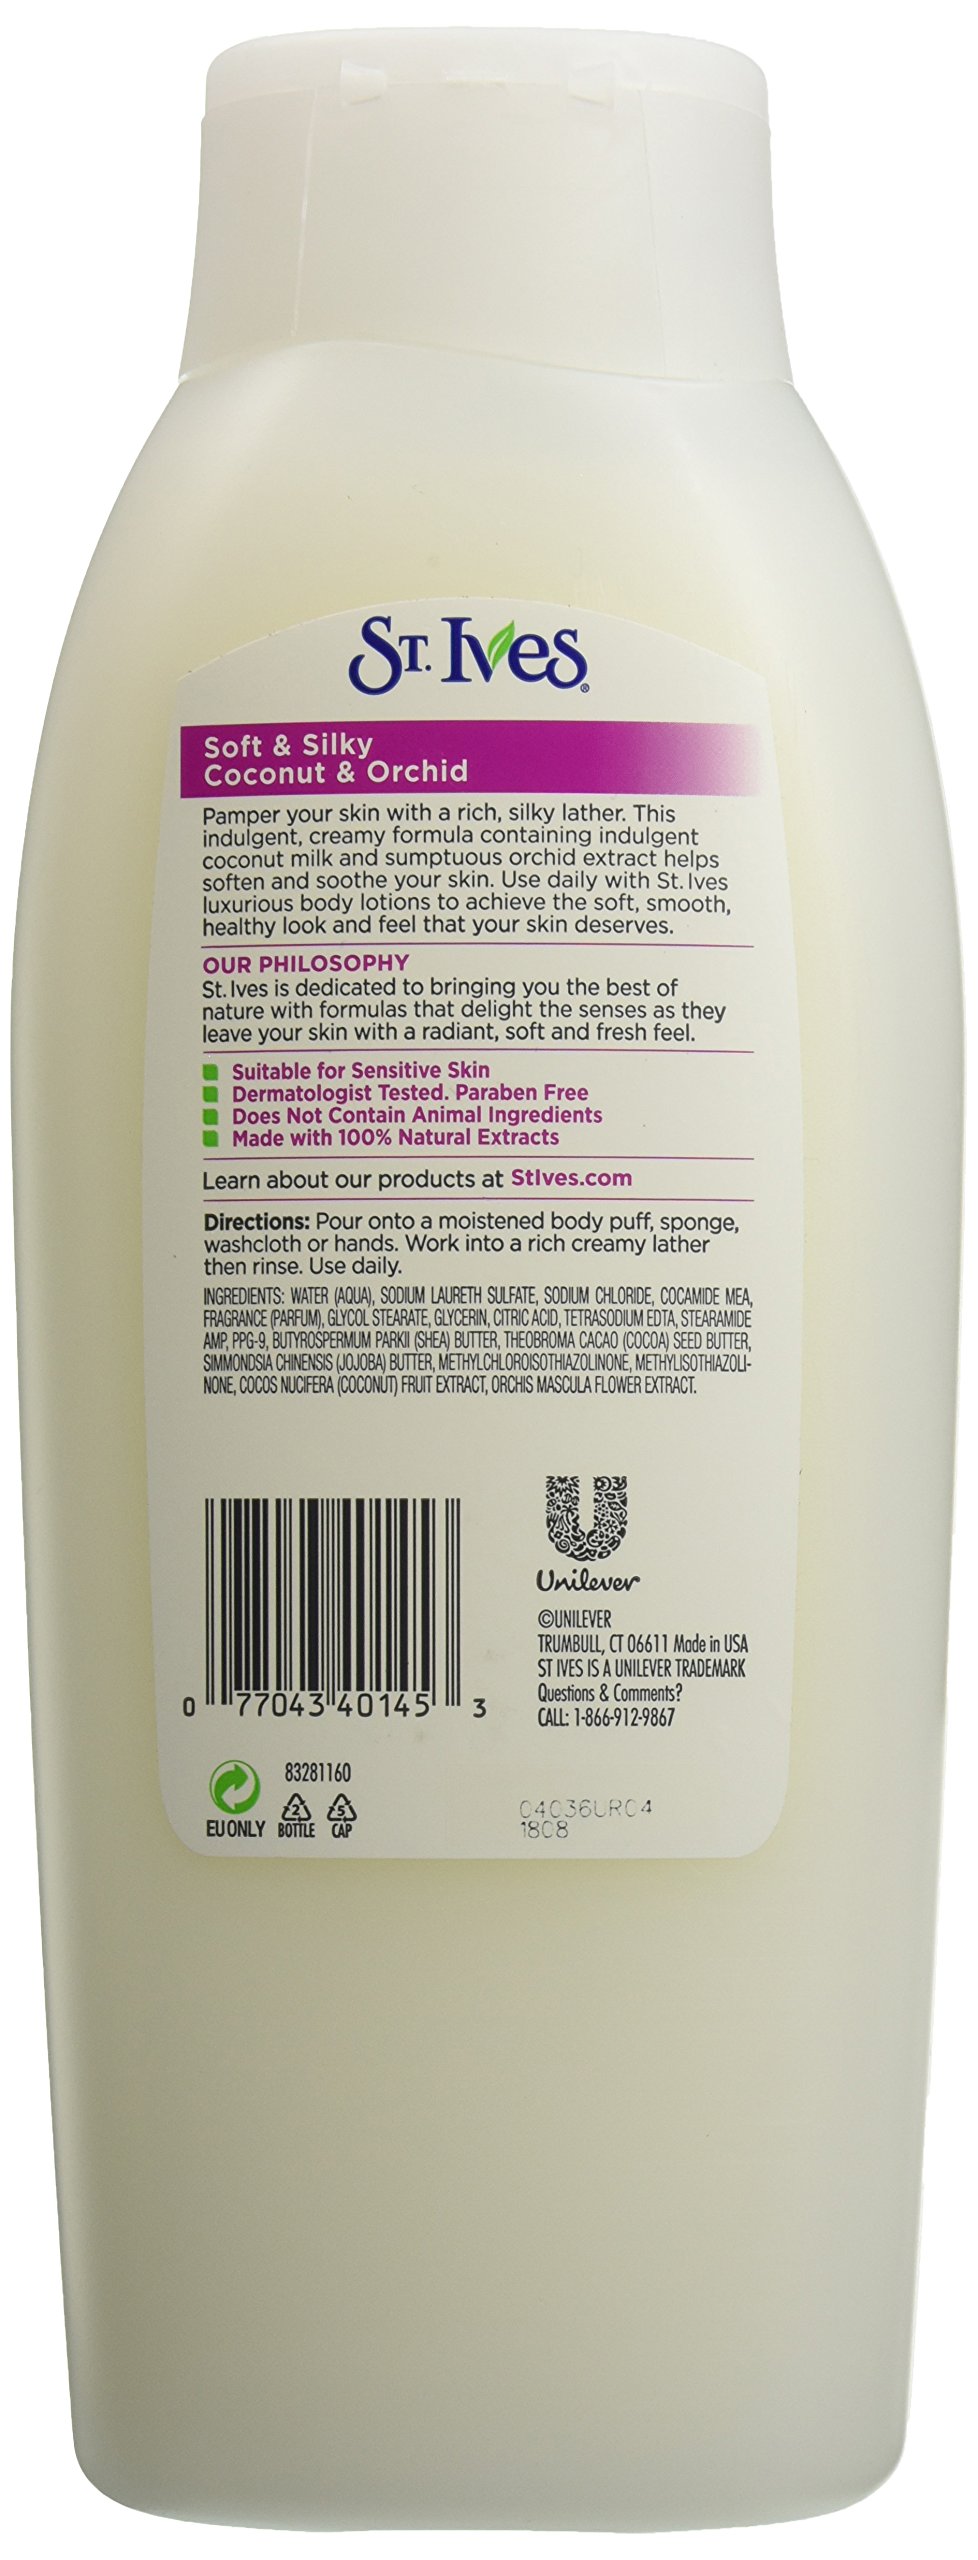 St. Ives Soft and Silky Tripple Butters Body Wash, Indulgent Coconut Milk, 24 Fl Oz